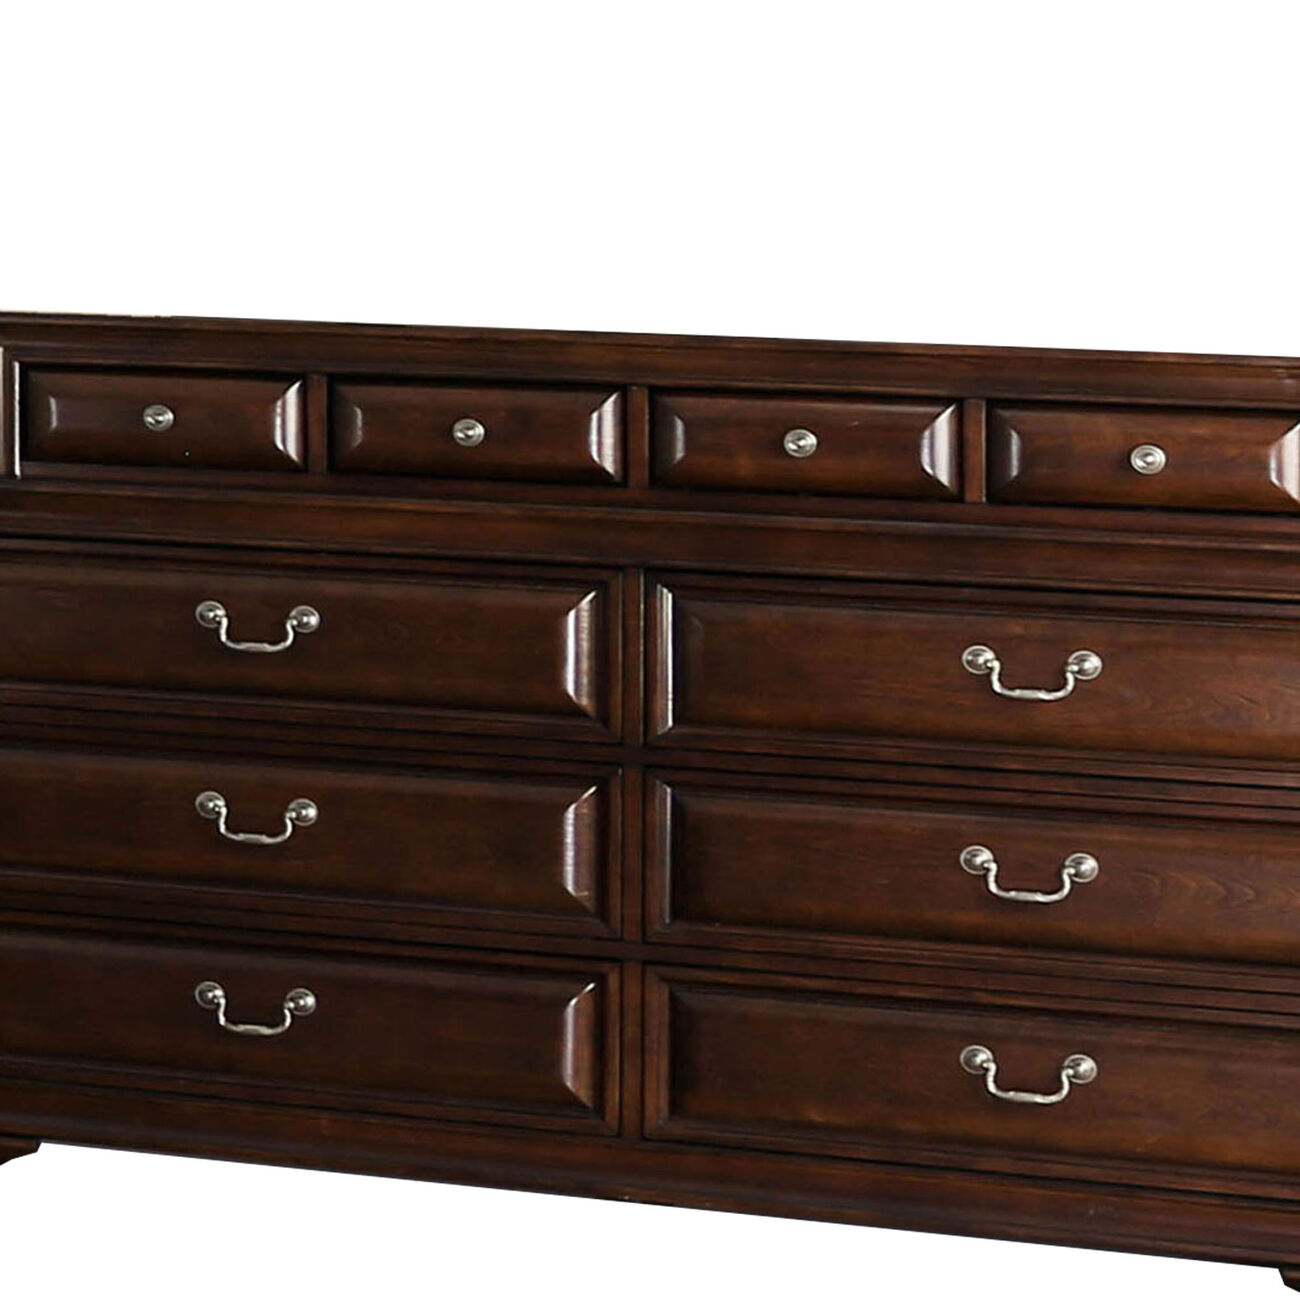 Transitional Wooden Dresser with 10 Drawers and bracket Legs, Brown